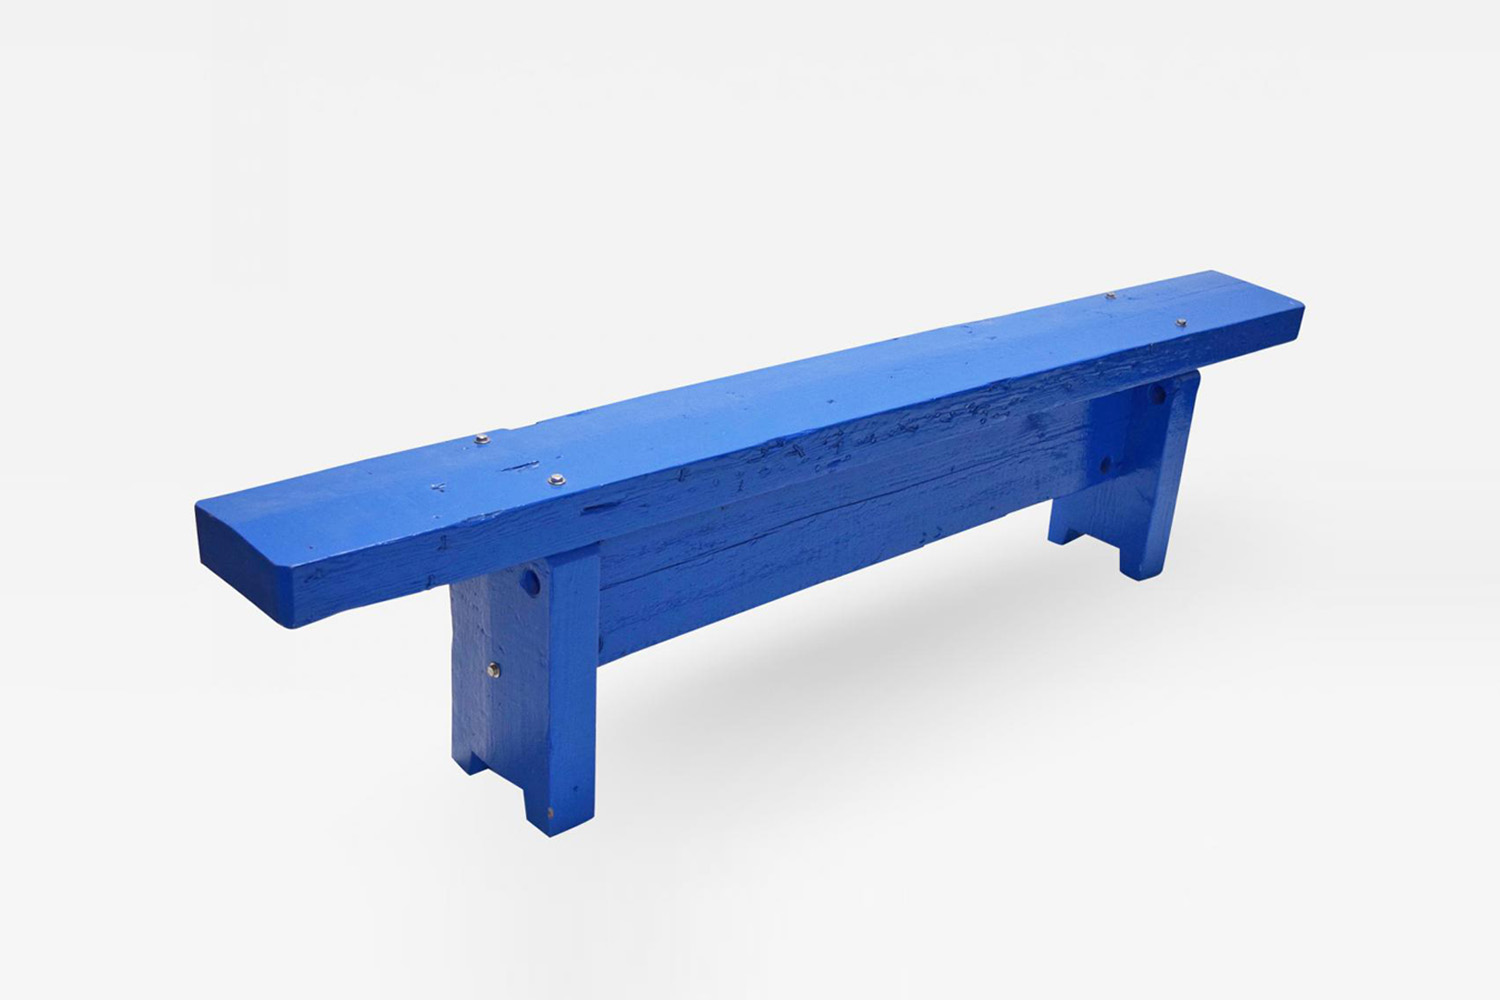 the bench at the foot of the bed is the piet hein eek one beam bench in blue; 